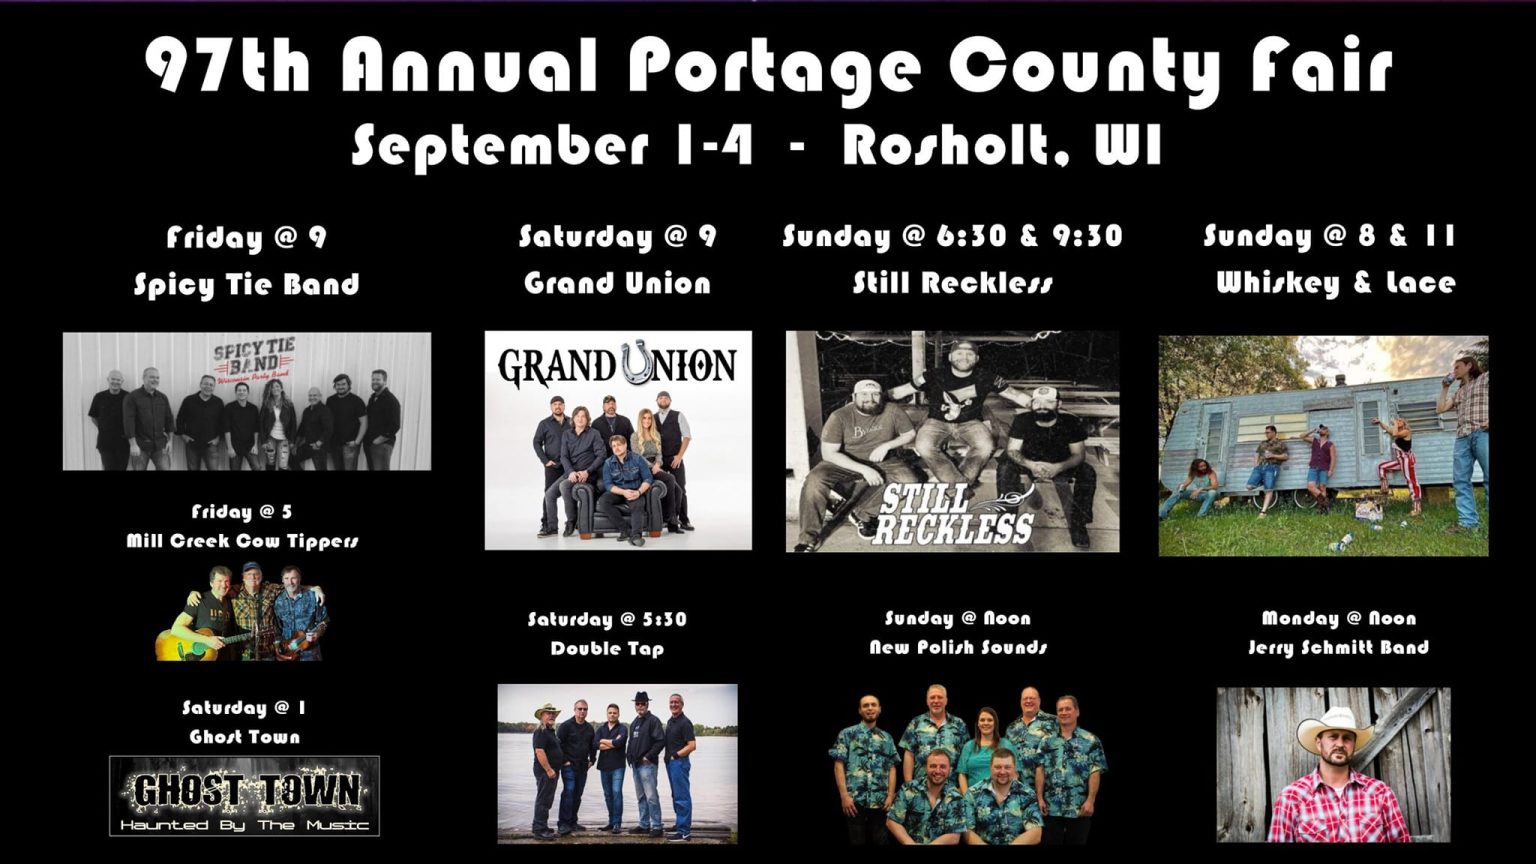 Portage County Fair Rosholt Wisconsin